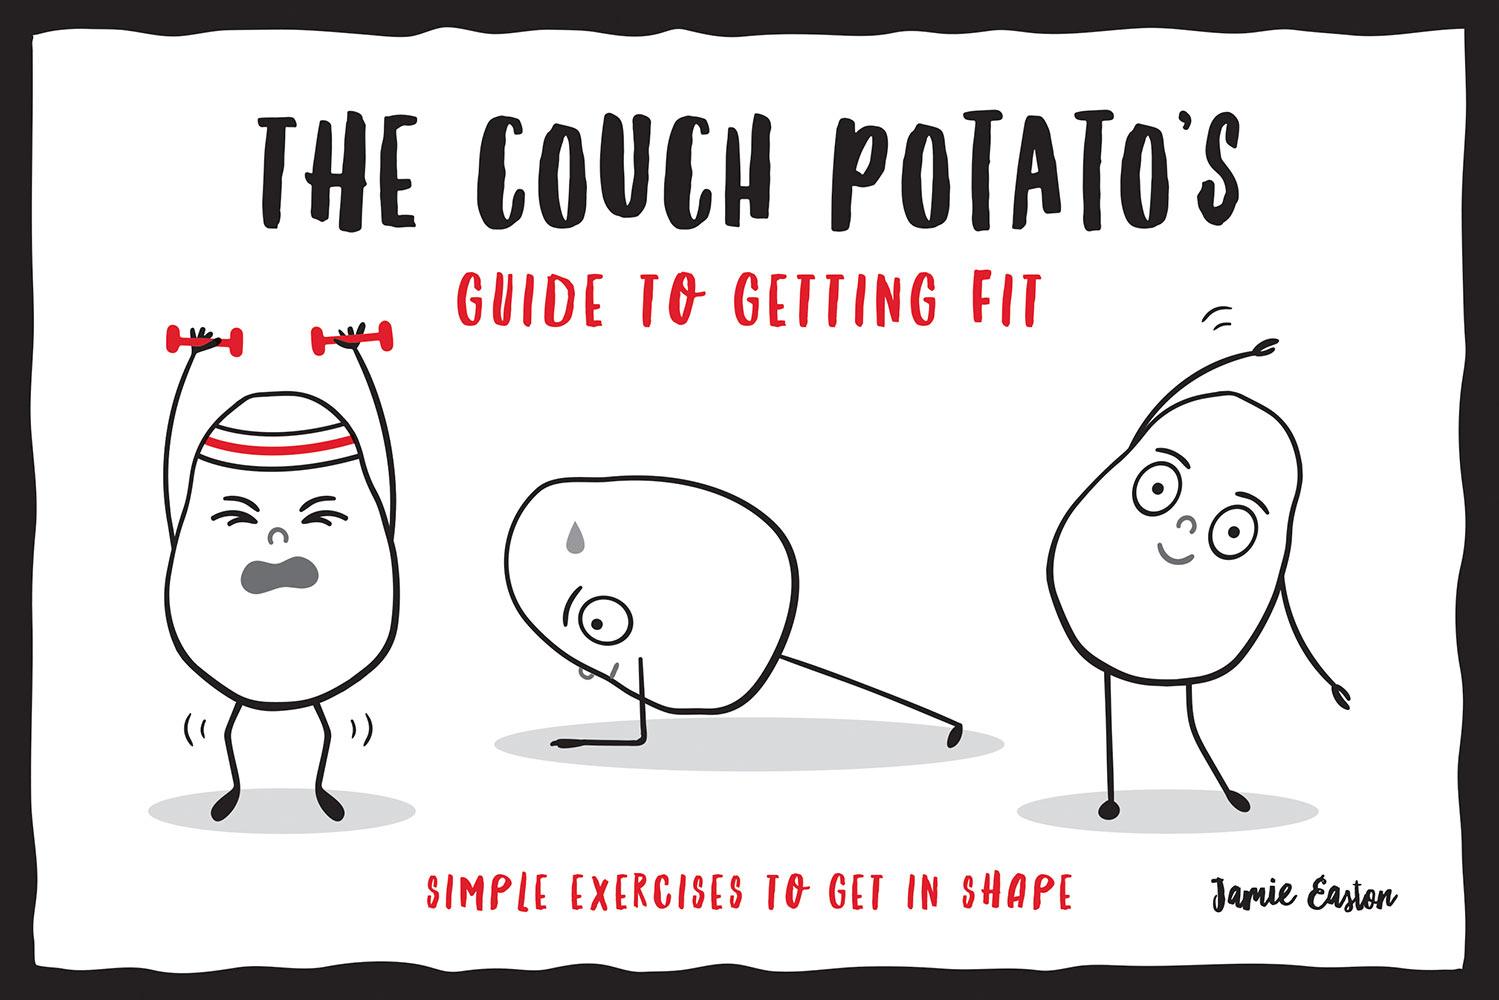 The Couch Potato‘s Guide to Staying Fit